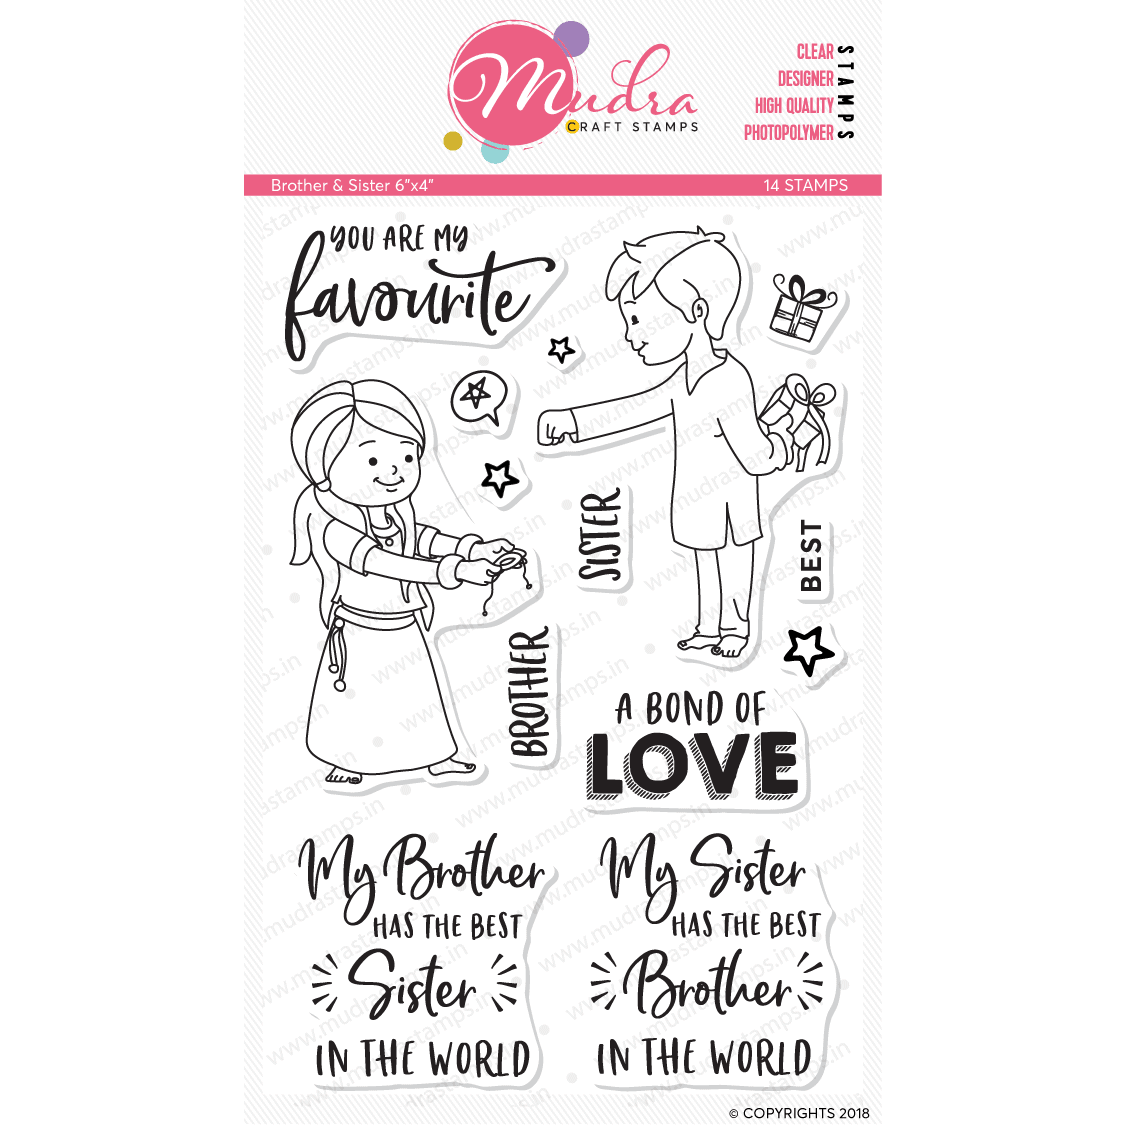 Mudra Stamps – Brother & Sister 6×4 – Mudra Craft Stamps